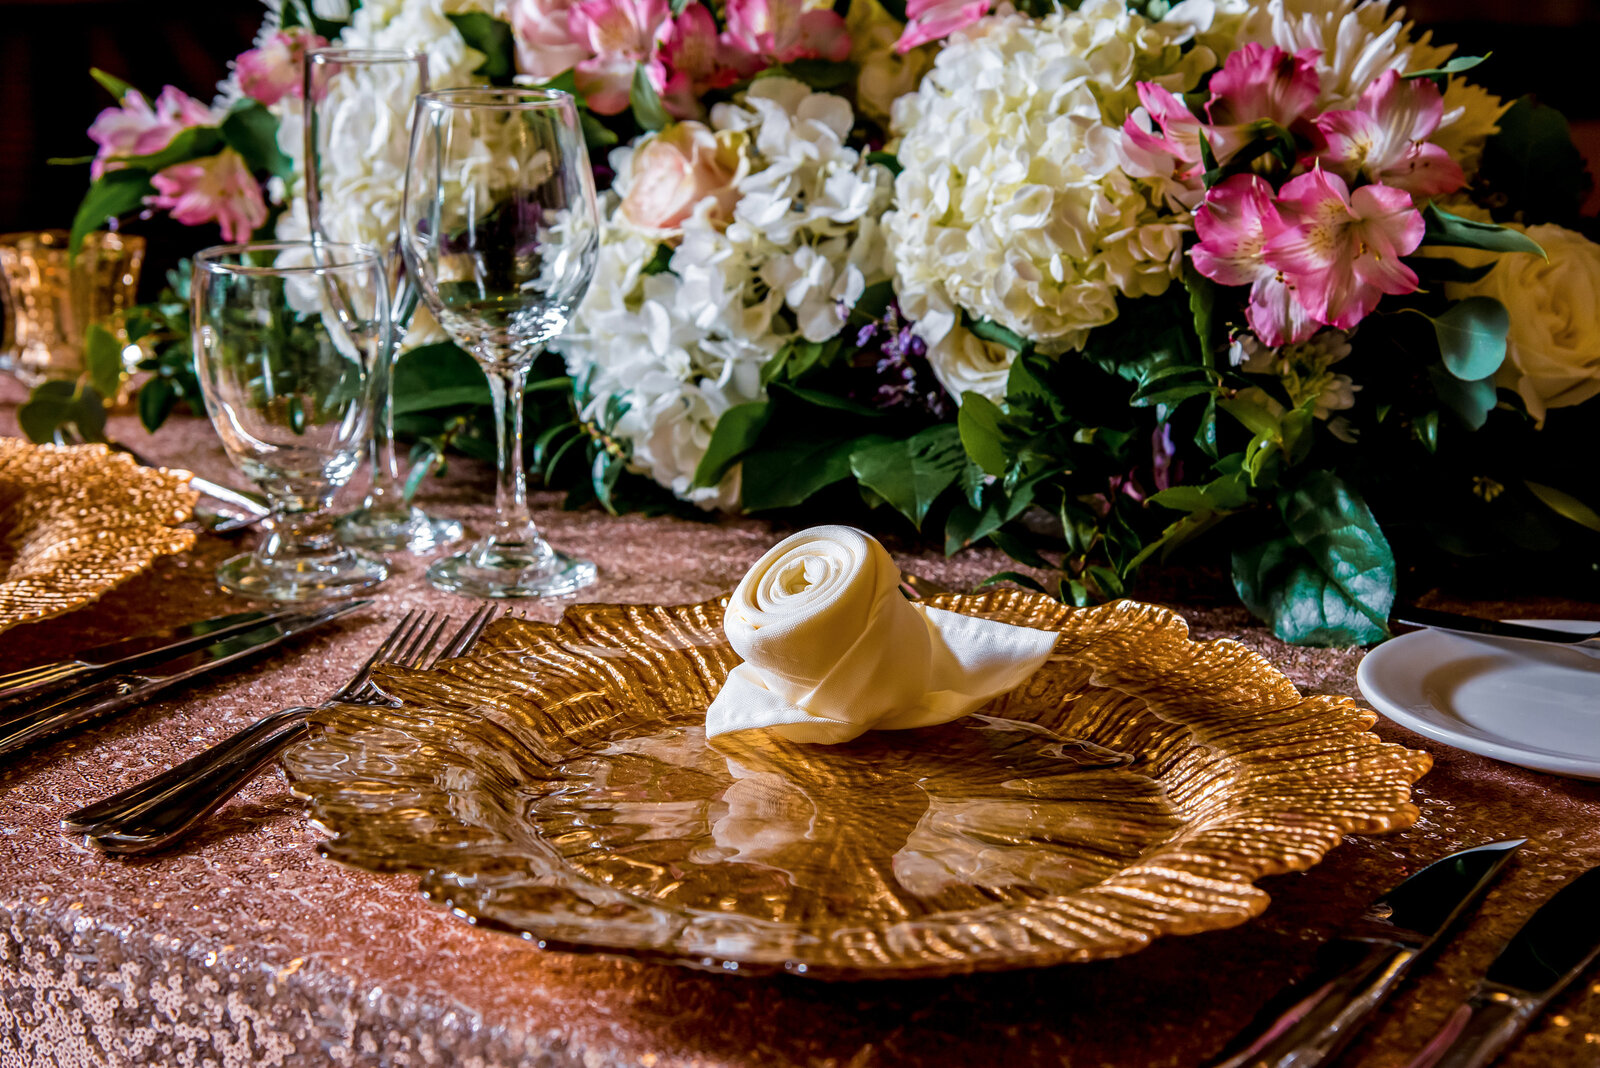 wedding charger plate rentals allentown PA 18103 mosaicandcompany.com hotel bethlehem gold charger plate3